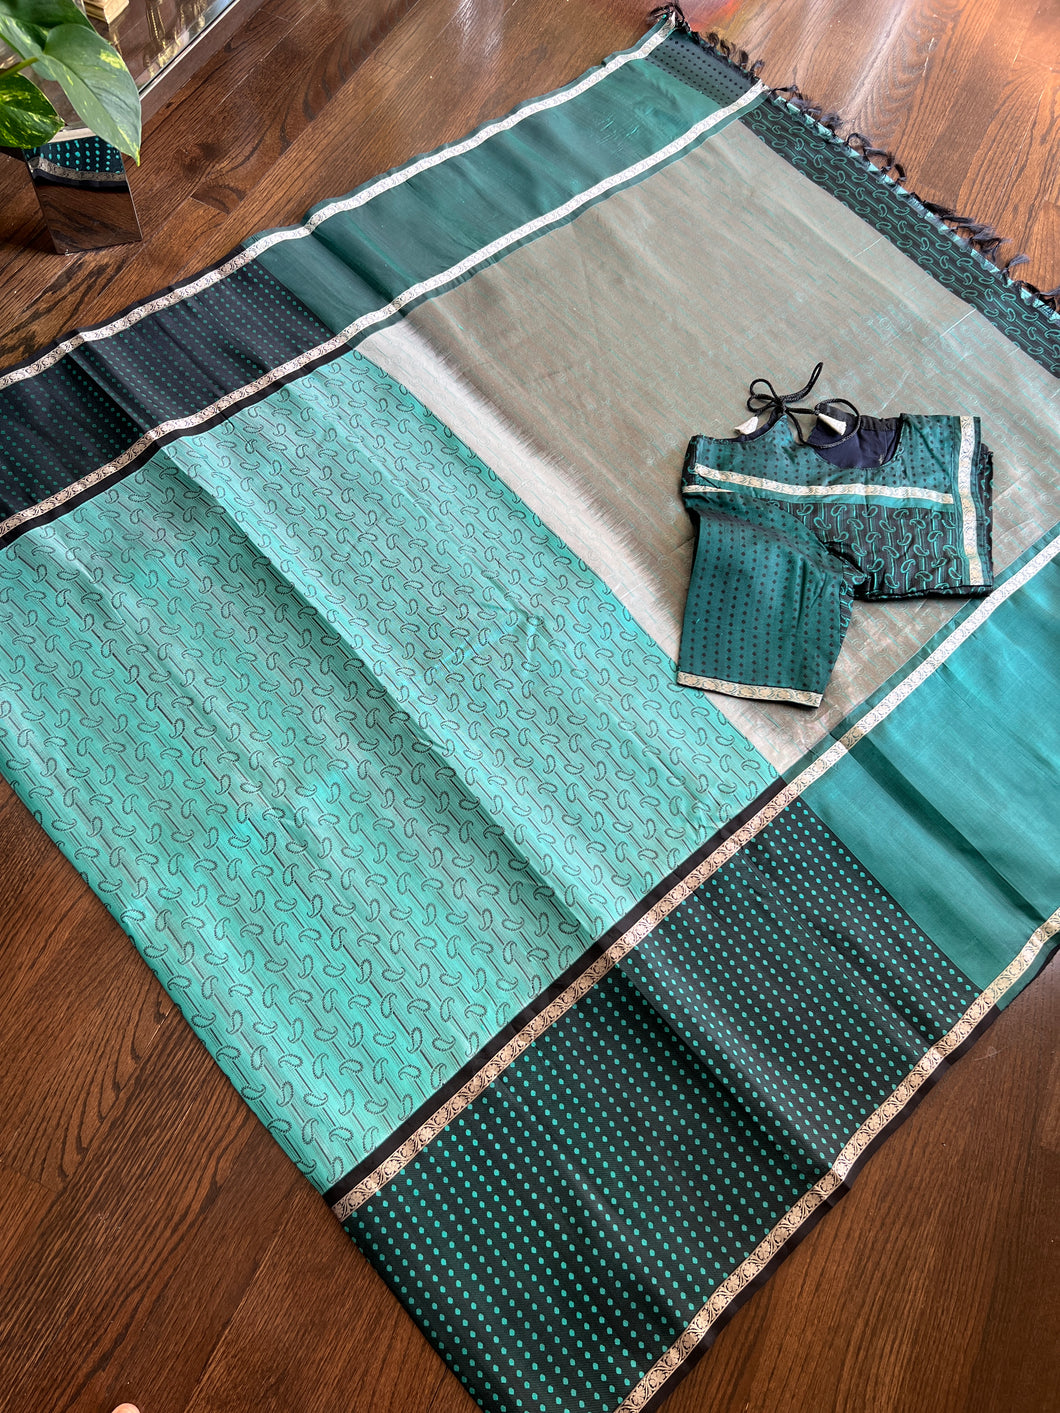 A Pure Sea green soft silk along with embossed patter and silver border